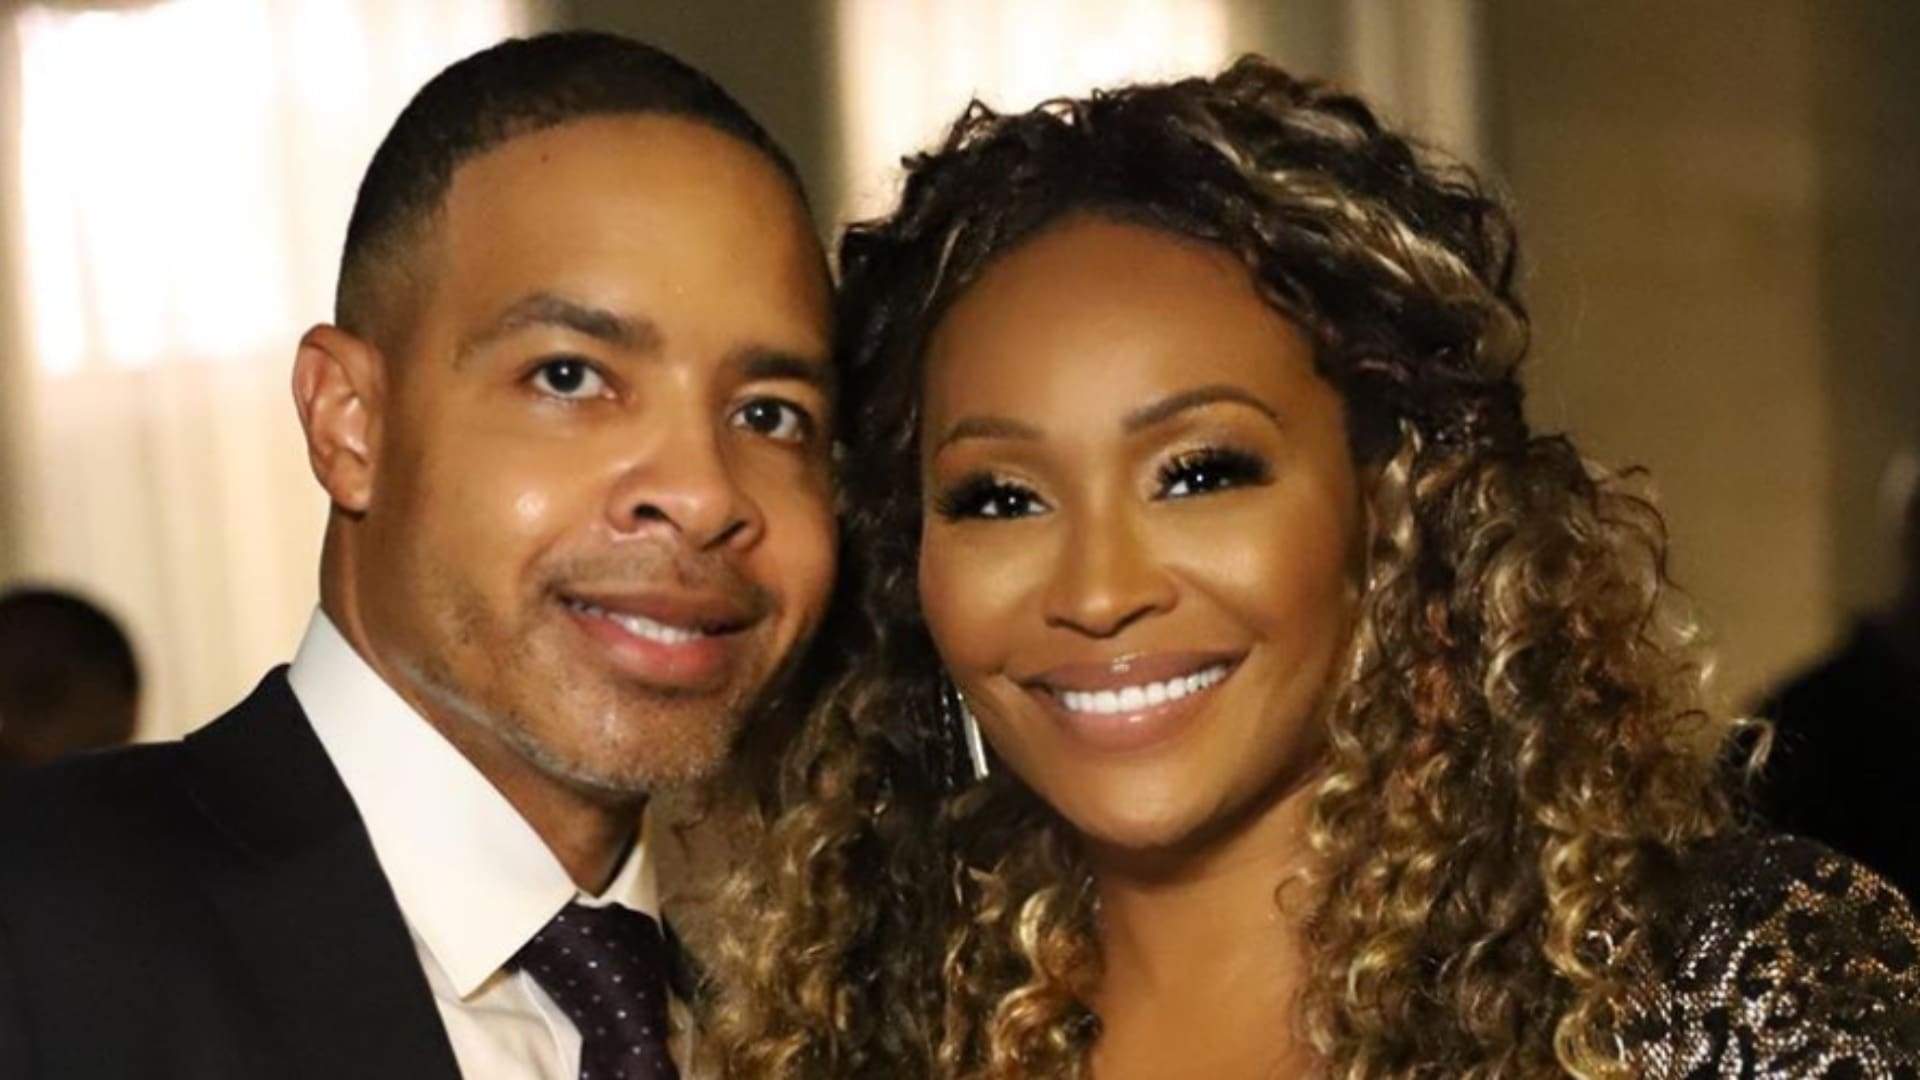 Cynthia Bailey Documents Her Amazing Face Treatment For Fans - See The Clips And Pics